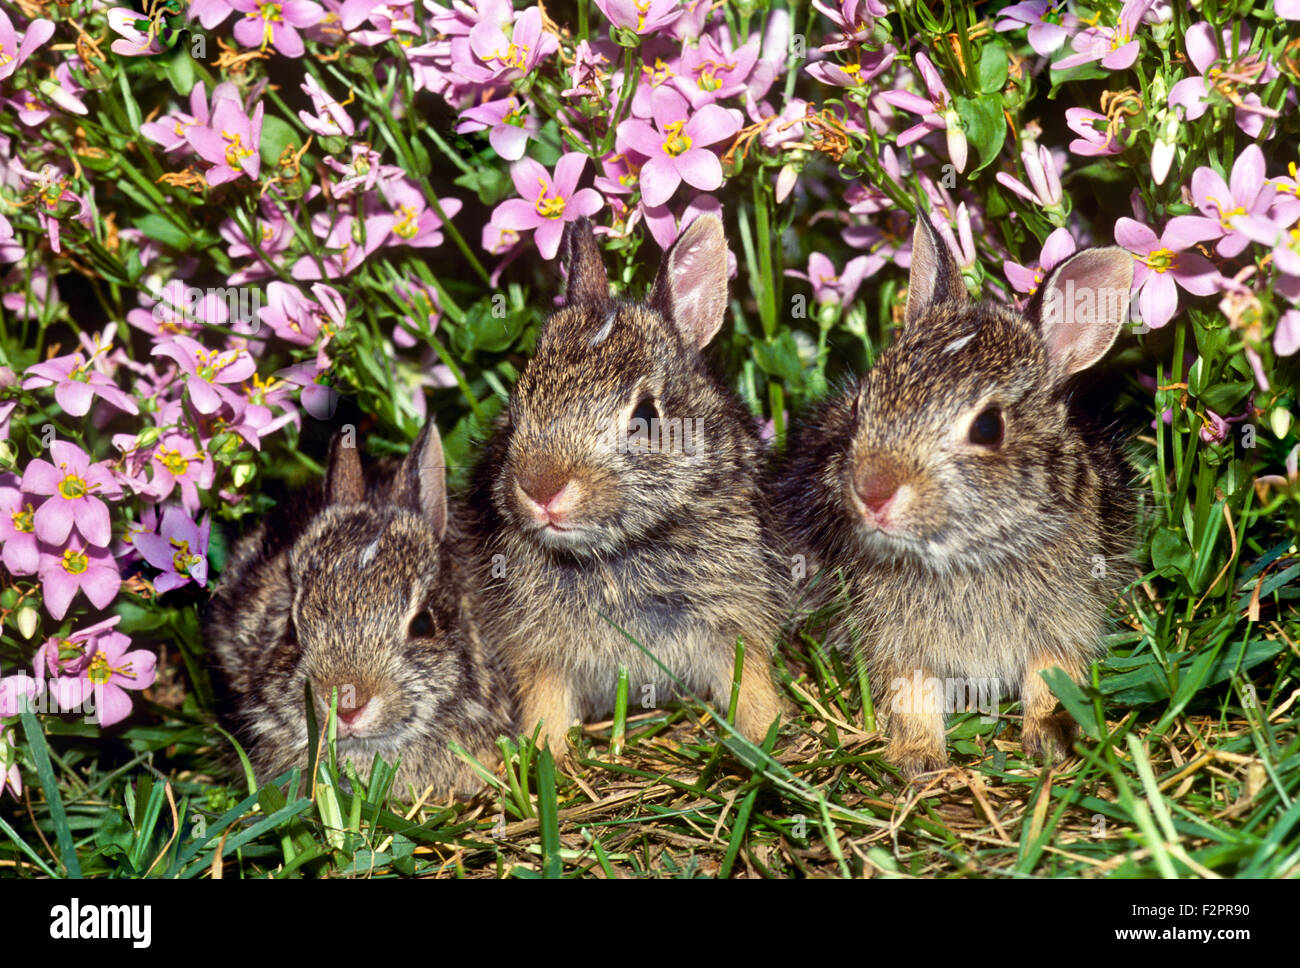 Three baby cottontail rabbits, Sylvilagus floridanus, hide in pink dianthus flowers at the border of the lawn, Missouri USA Stock Photo